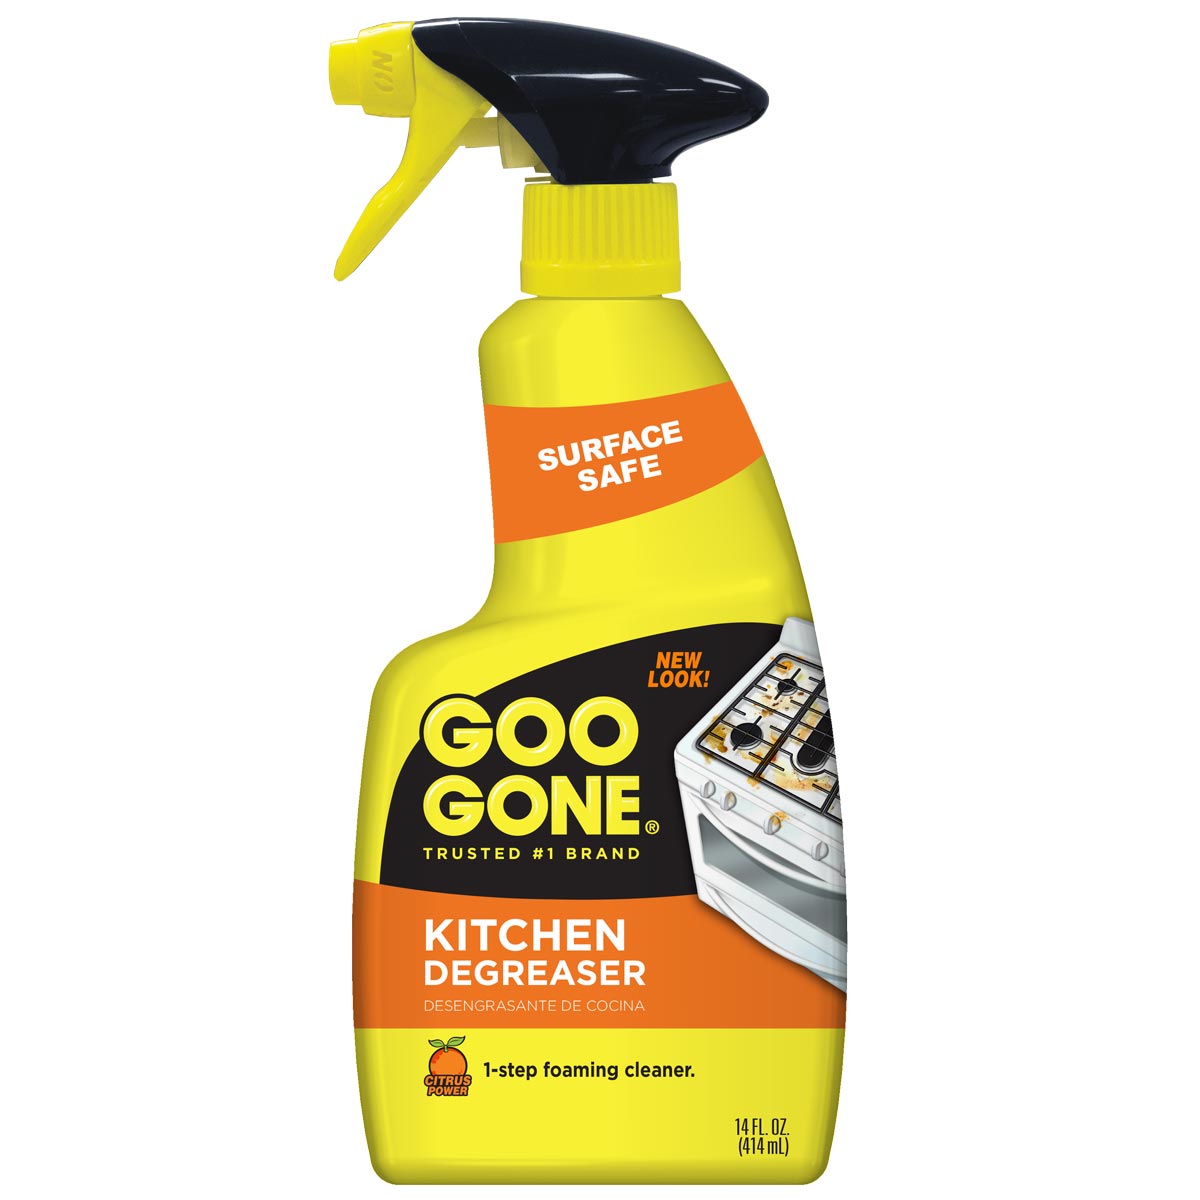 Grease Be Gone: Choosing the Right Degreaser for Your Kitchen缩略图